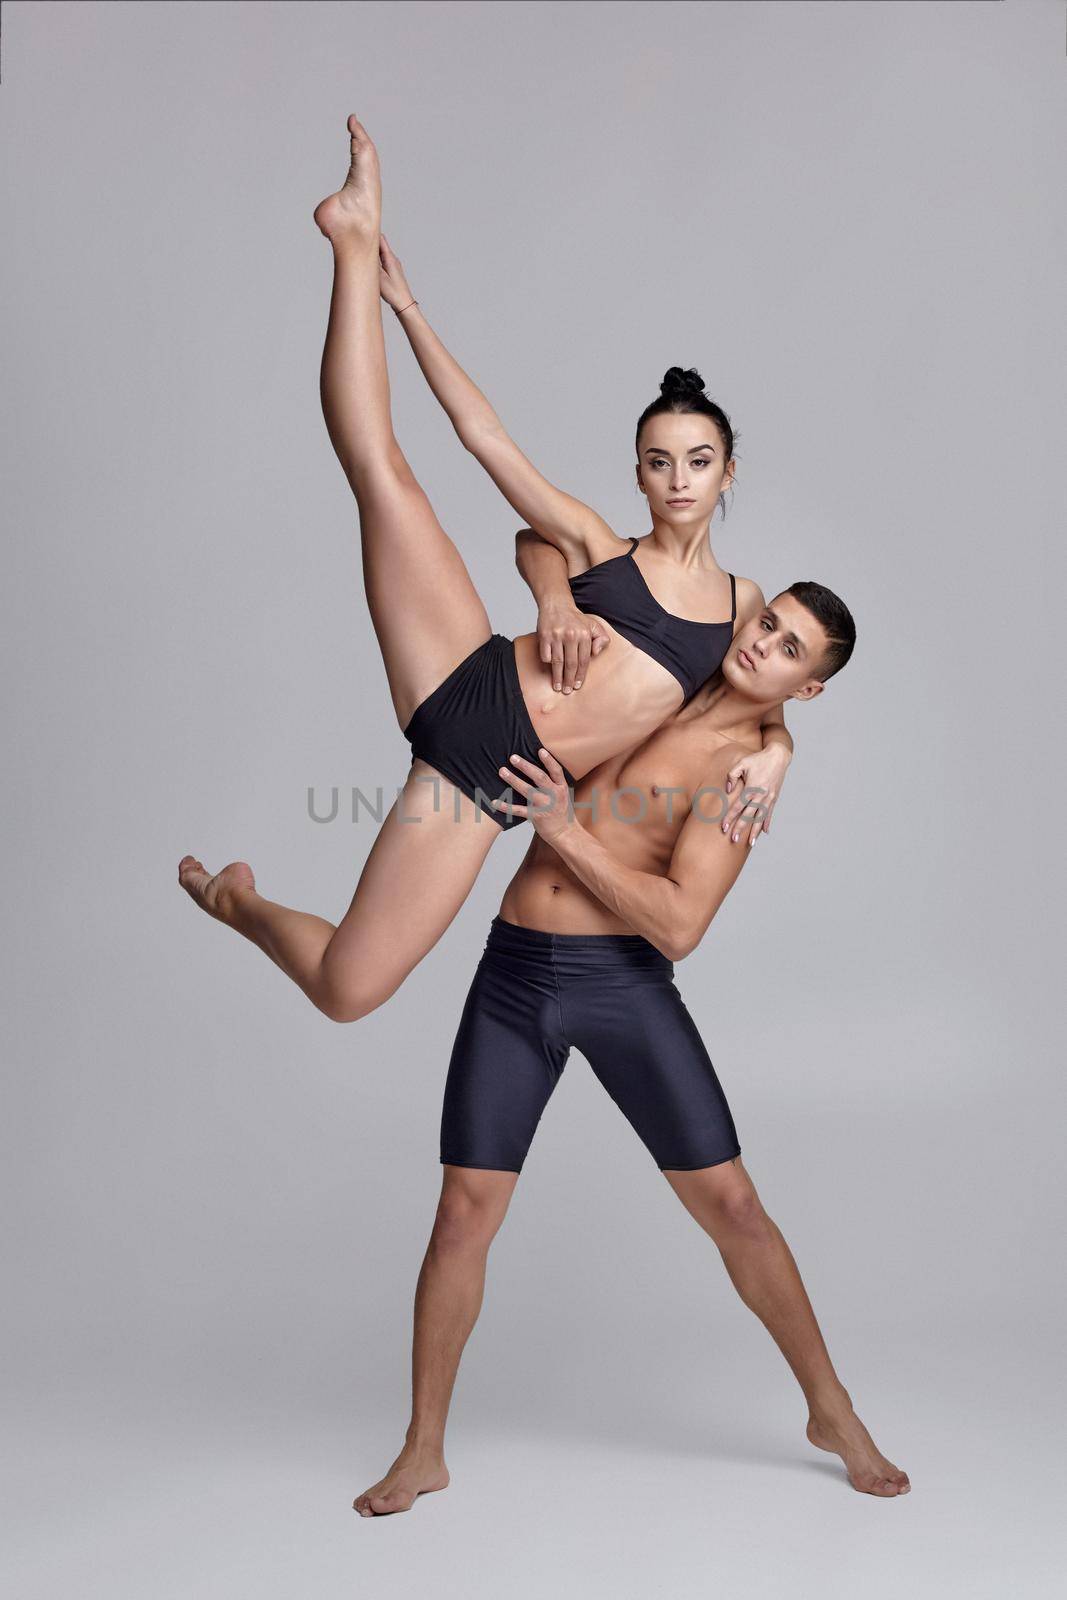 A couple of a strong ballet dancers in black suits are posing over a gray studio background. Handsome man in black shorts is holding in his hands a pretty woman in a black swimwear. Ballet and contemporary choreography concept. Art photo.